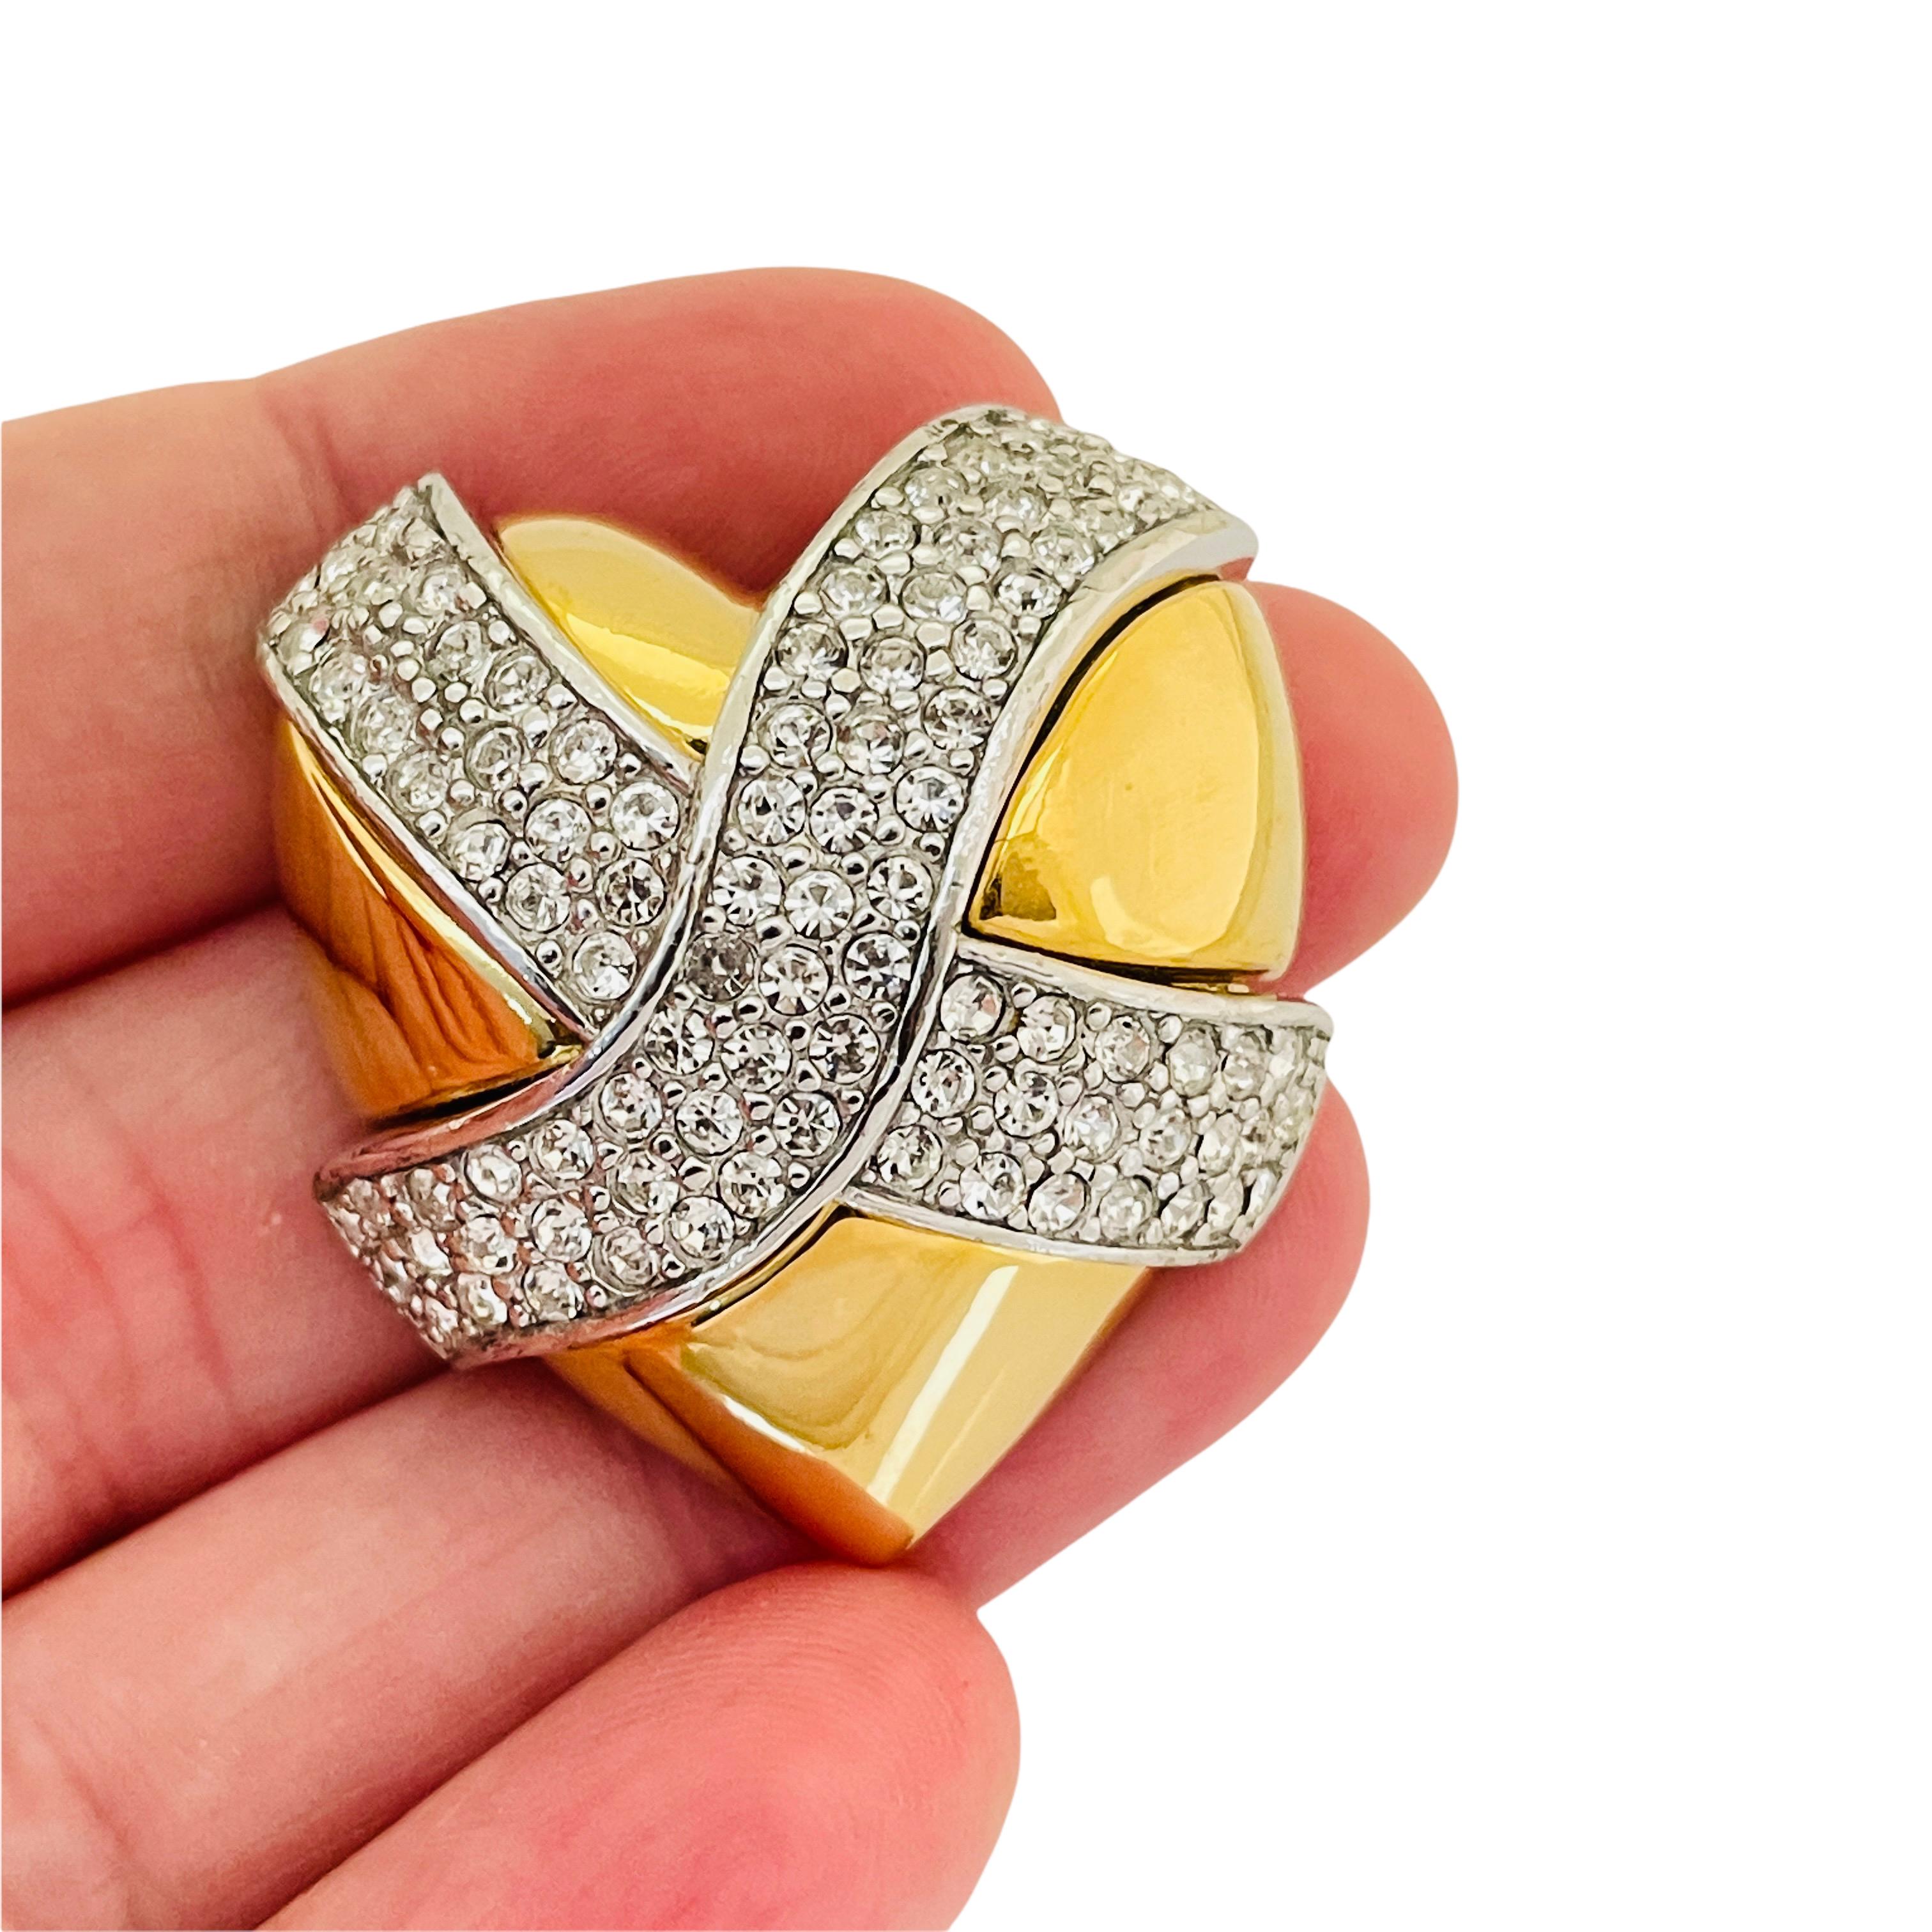 Vintage GIVENCHY Paris New York gold rhinestone heart designer runway brooch In Good Condition For Sale In Palos Hills, IL